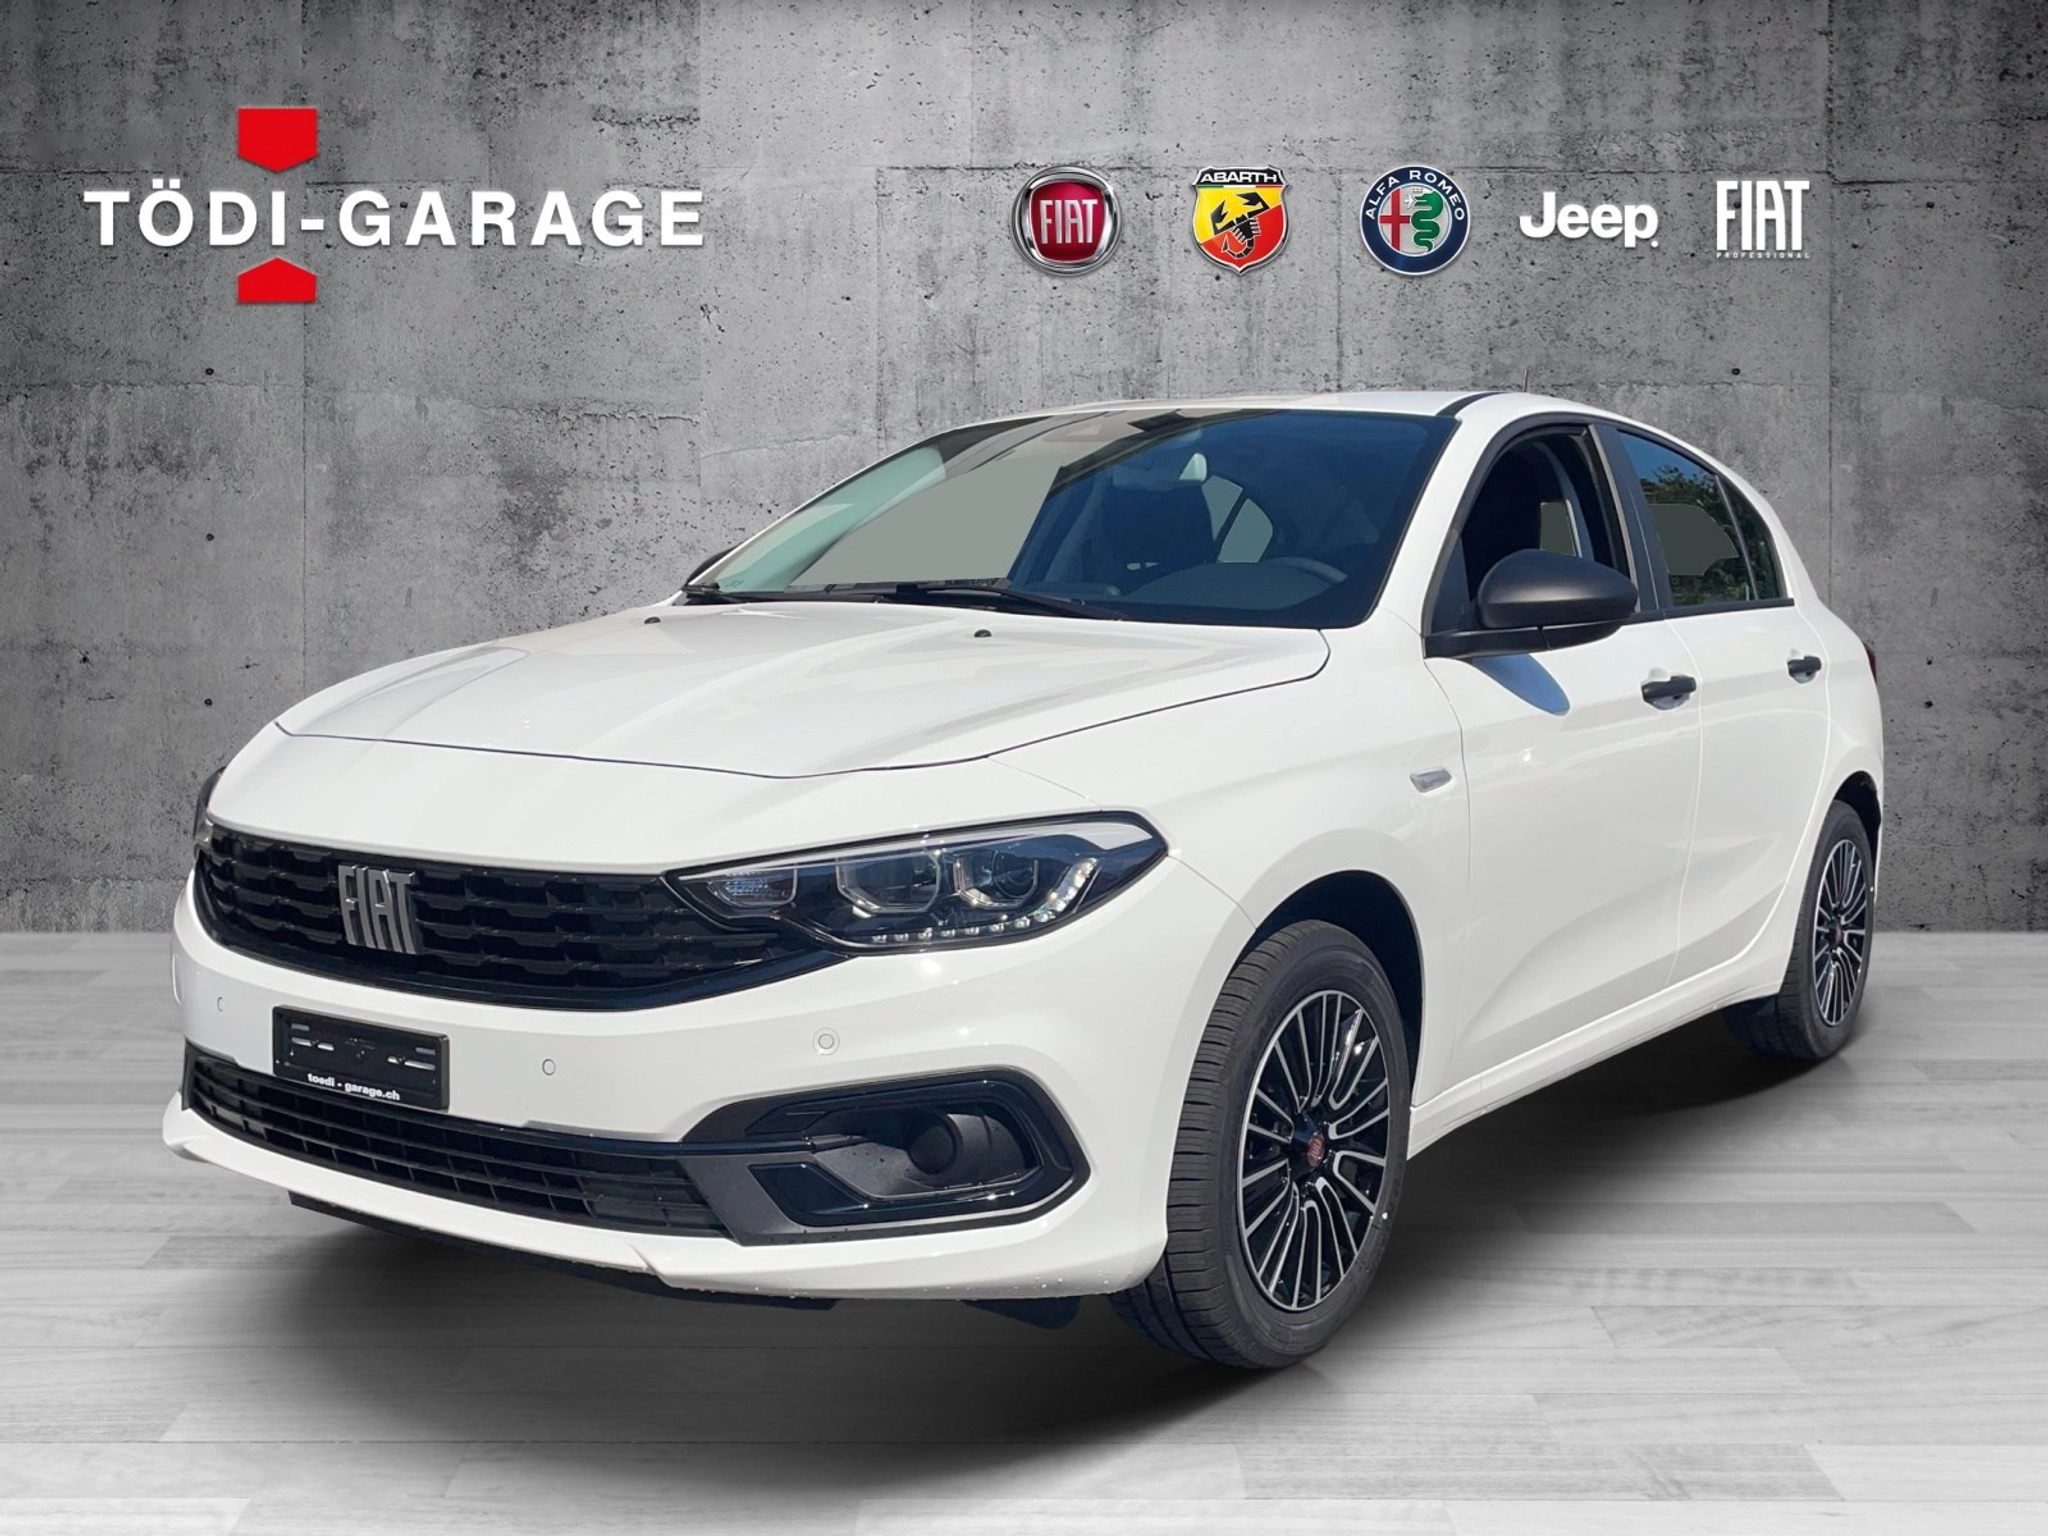 Fiat Tipo Leasing in Switzerland from CHF 190 